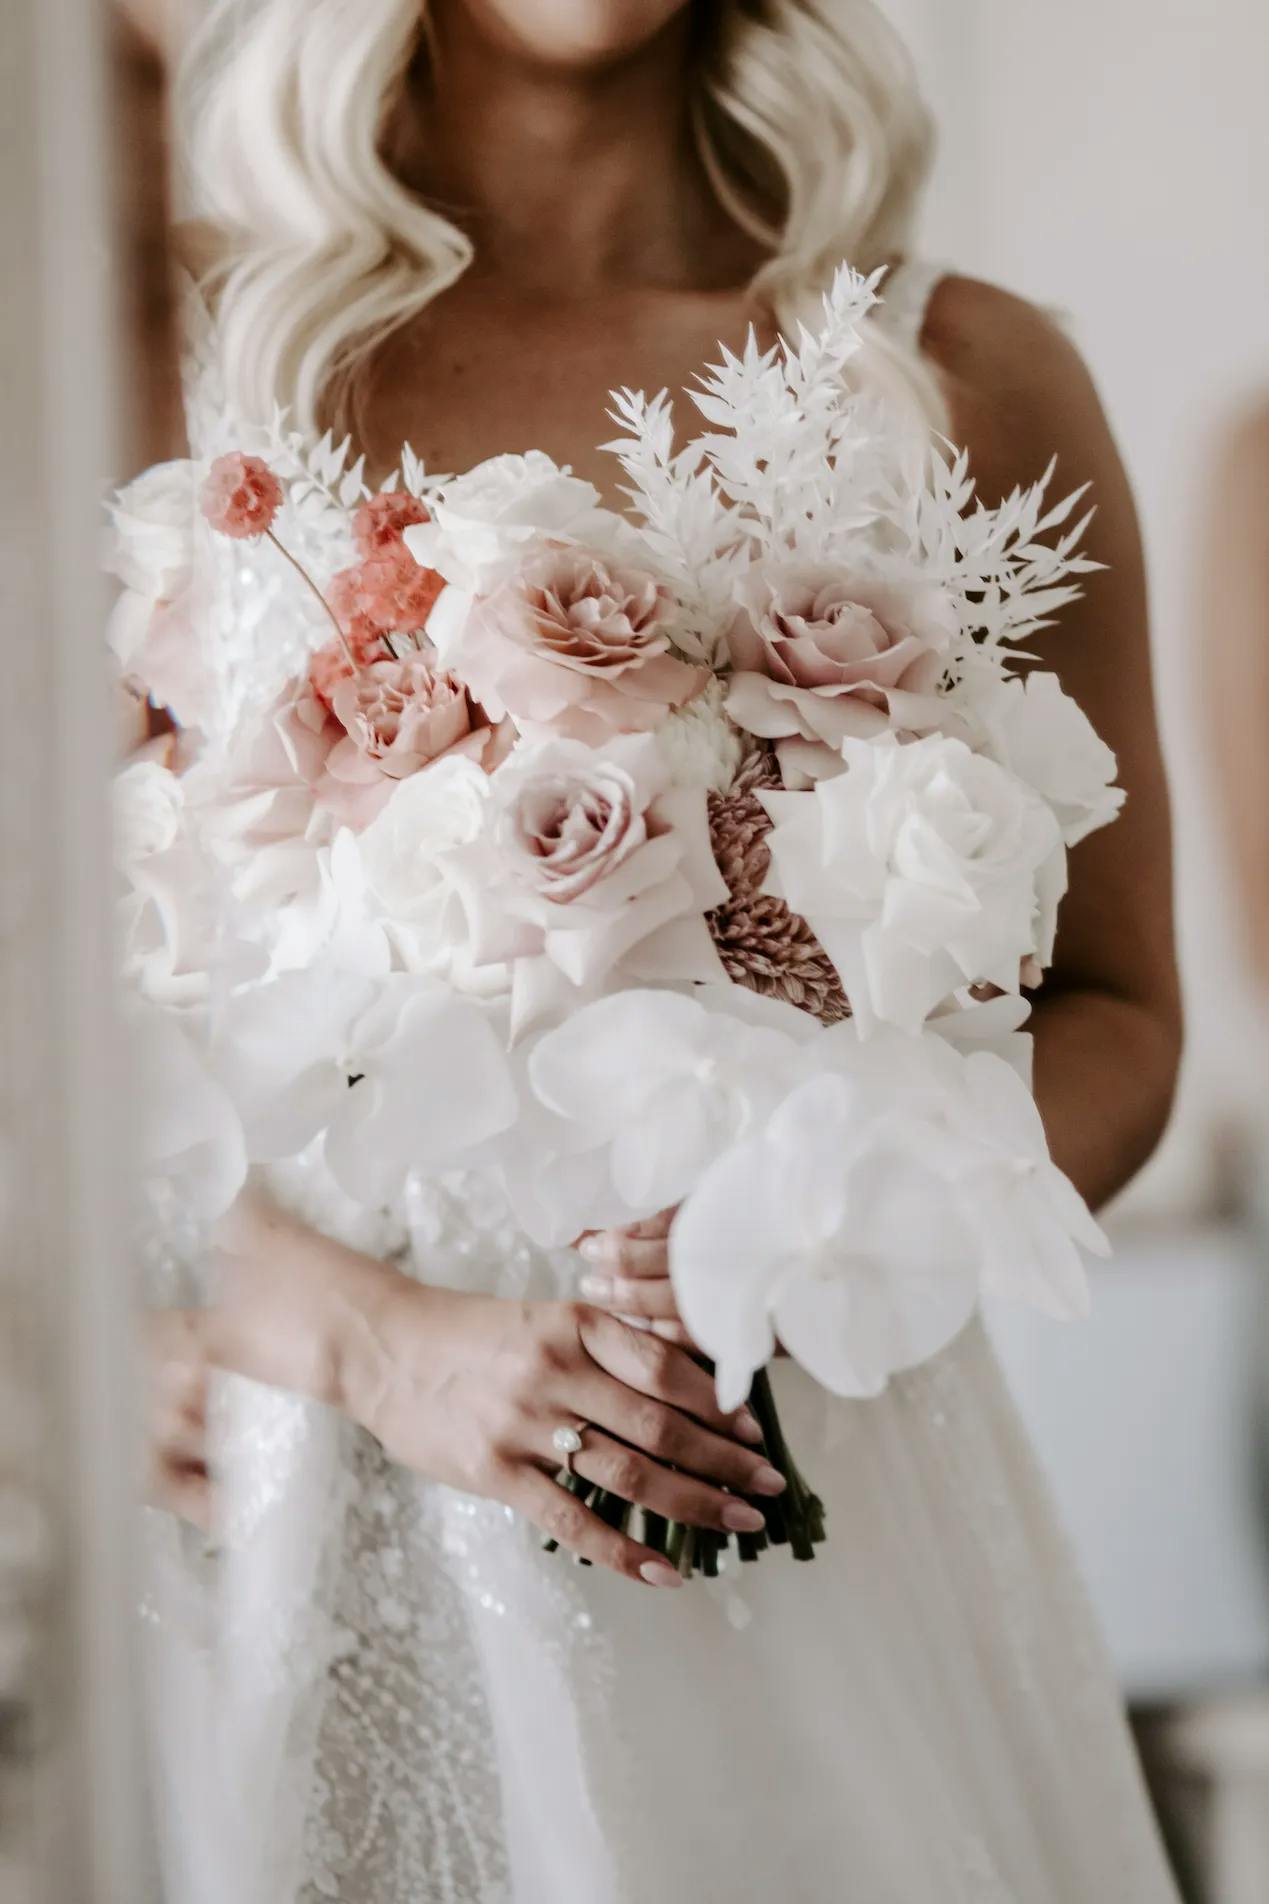 A bride in a wedding dress holds a floral bouquet featuring white orchids, pink roses, and other assorted flowers and greenery. The focus is on the flowers, with the bride's face partially out of frame. The image has a soft, romantic feel.